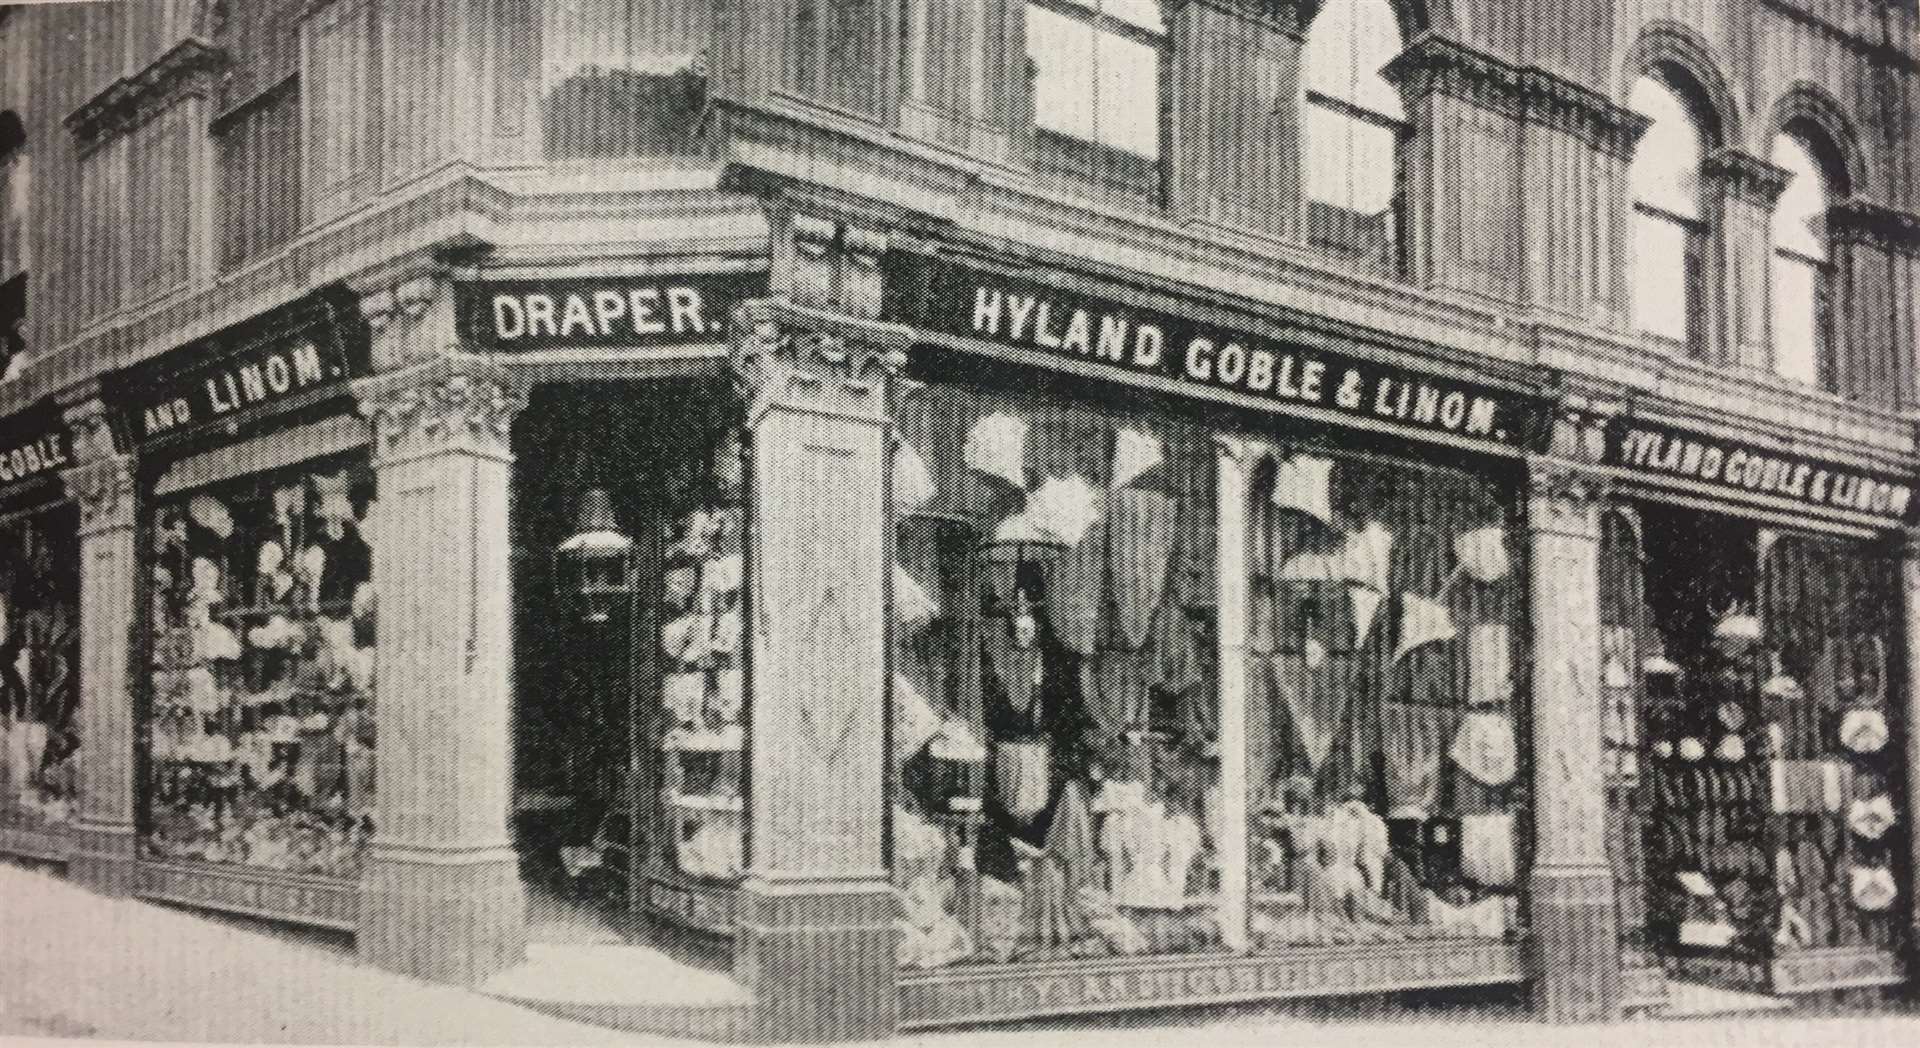 Lewis, Hyland, Goble and Linom, based in Rendezvous Street and pictured in 1898